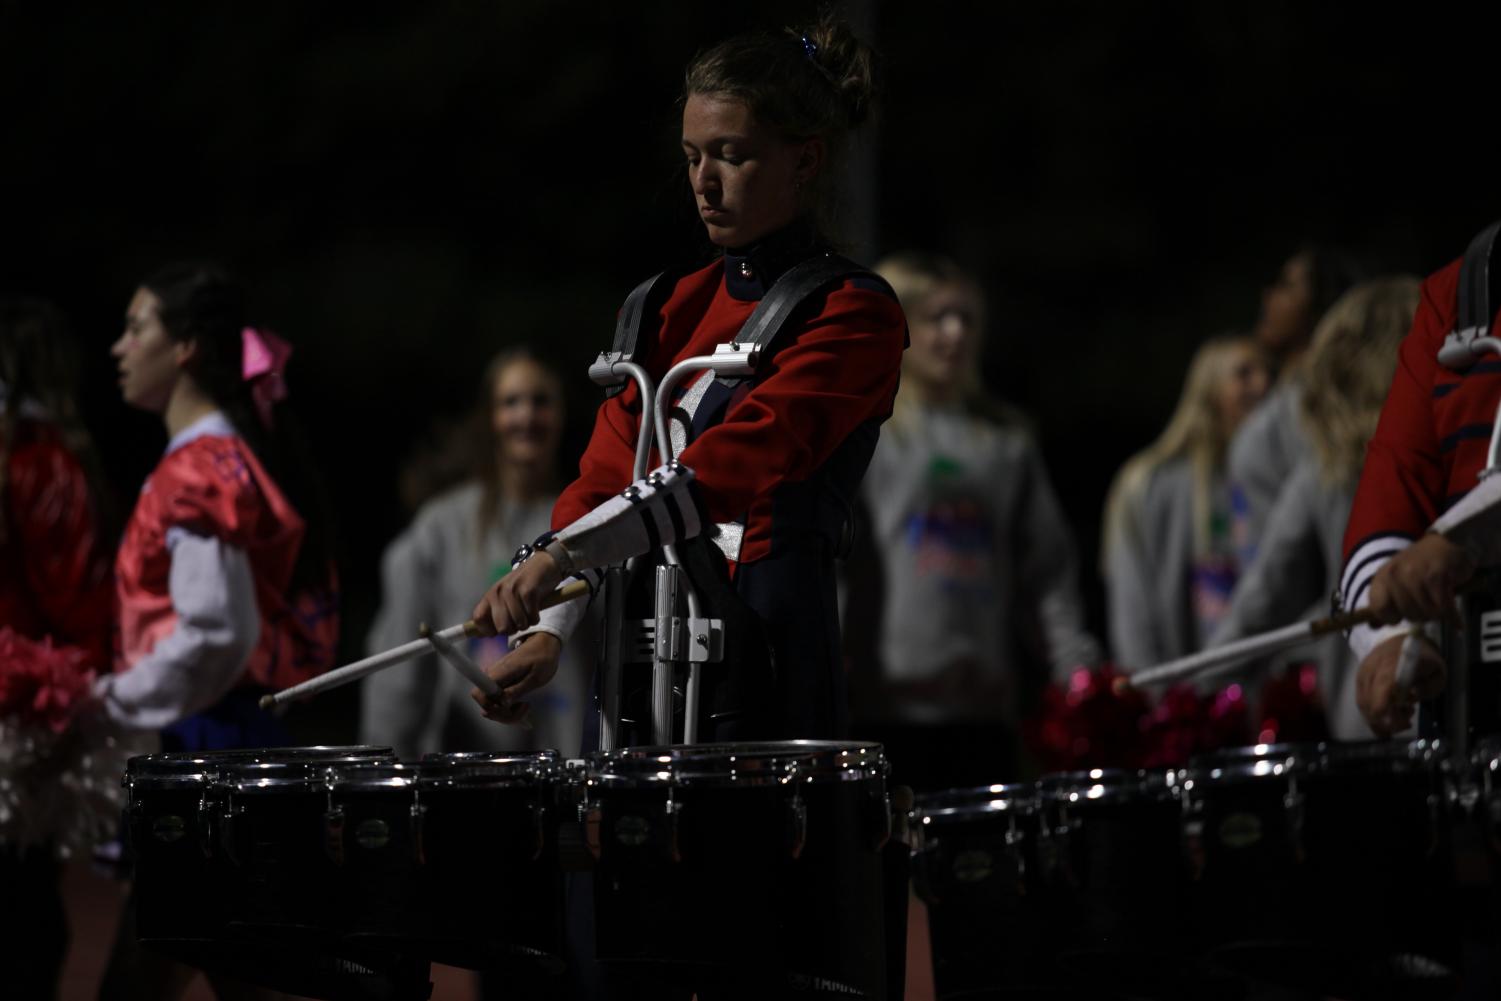 See+Moments+From+Marching+Bands+Full+Season